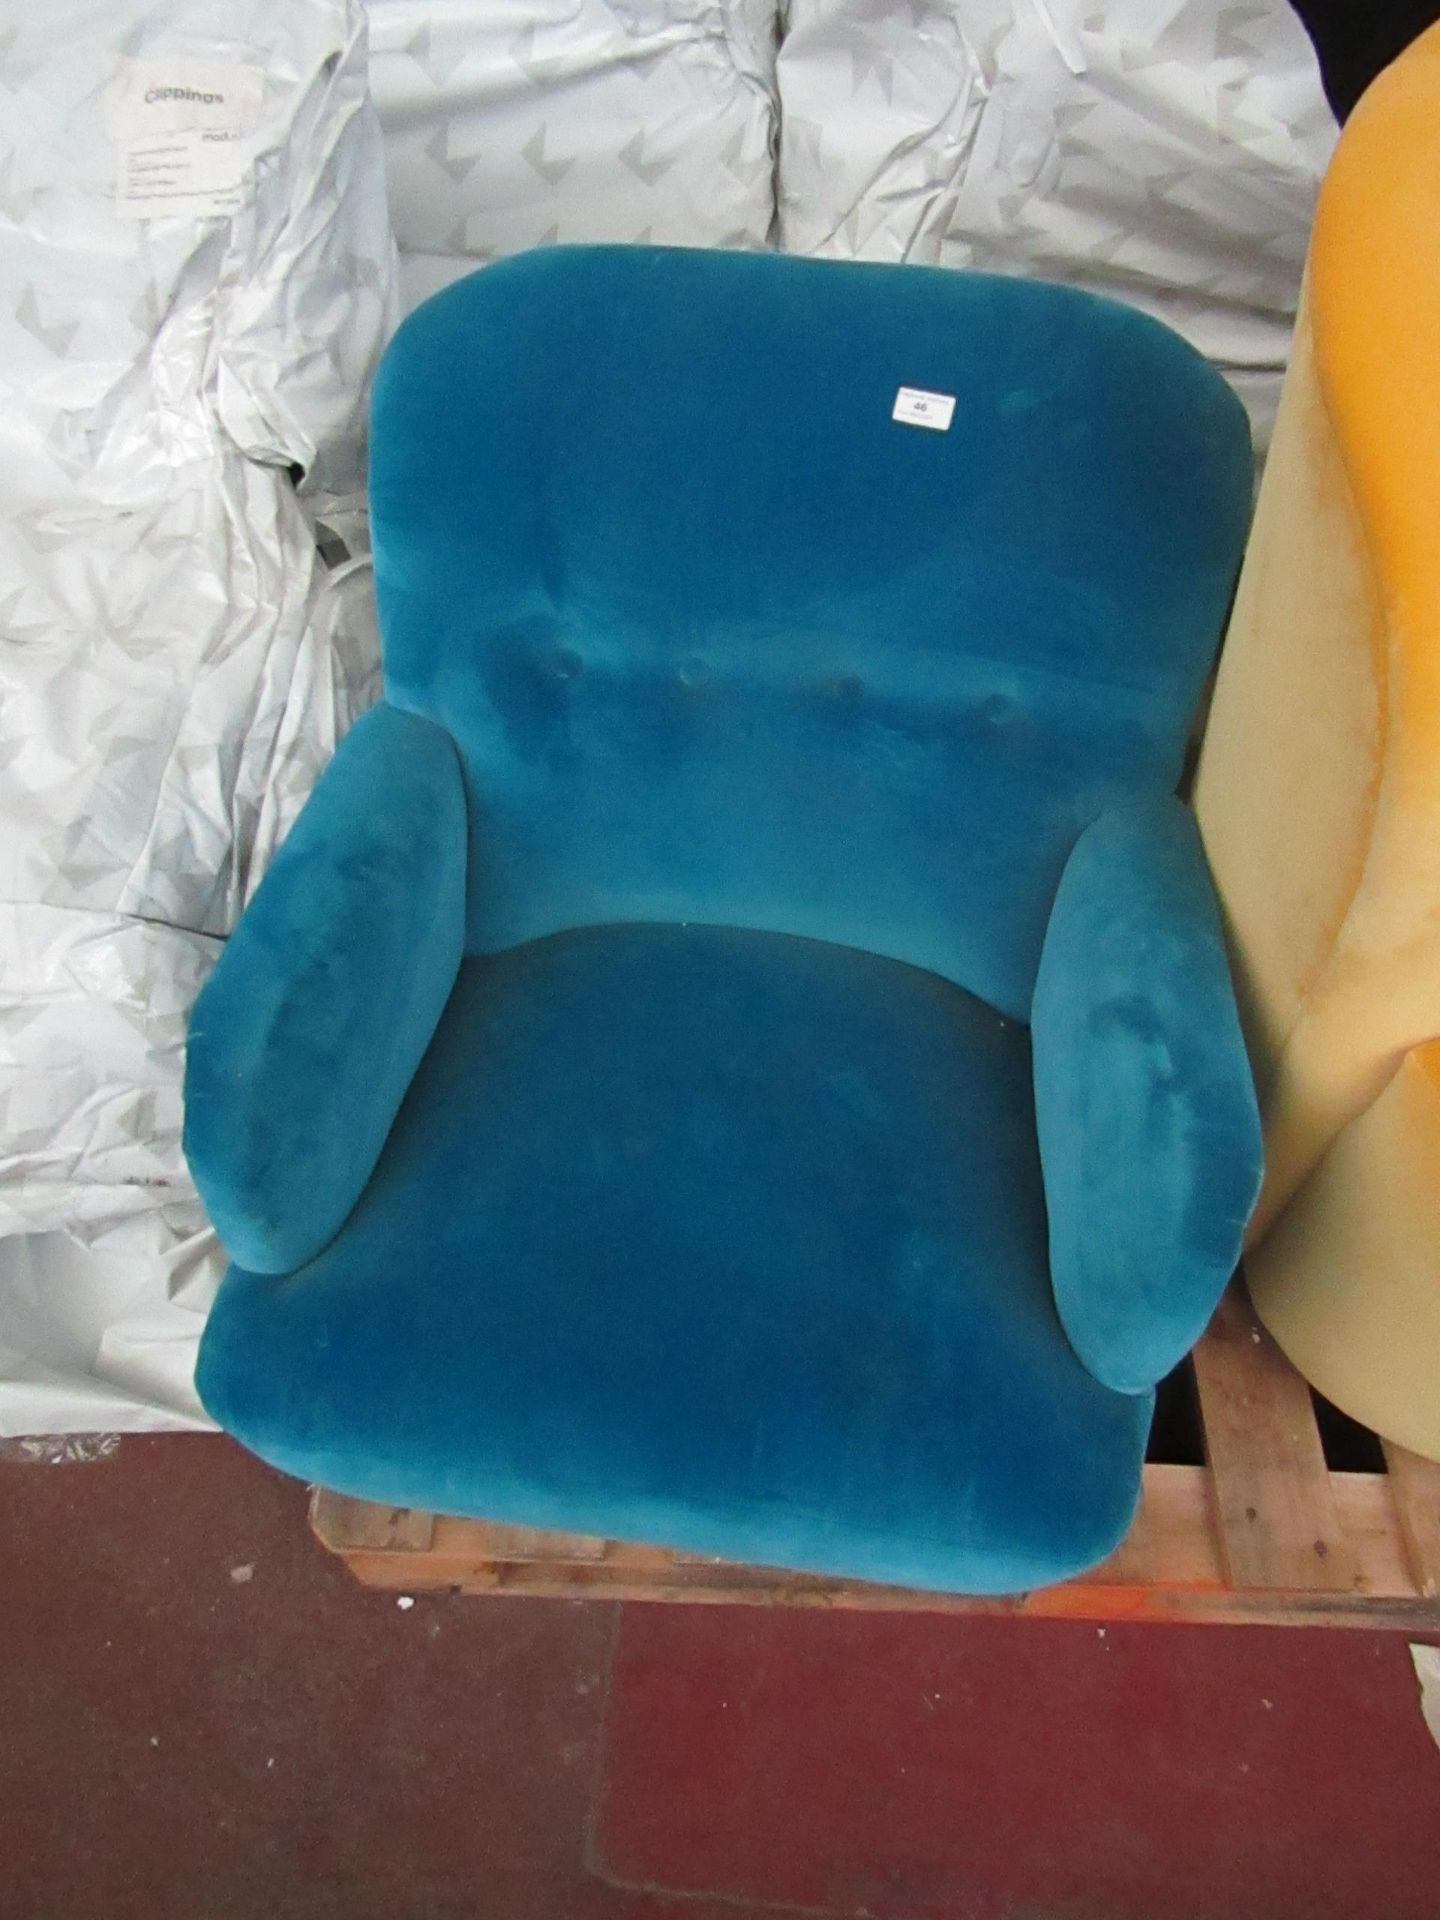 | 1X | MADE.COM BLUE VELVET ACCENT CHAIR| NO LEGS AND COULD DO WITH A GOOD DUST DOWN | RRP £- |